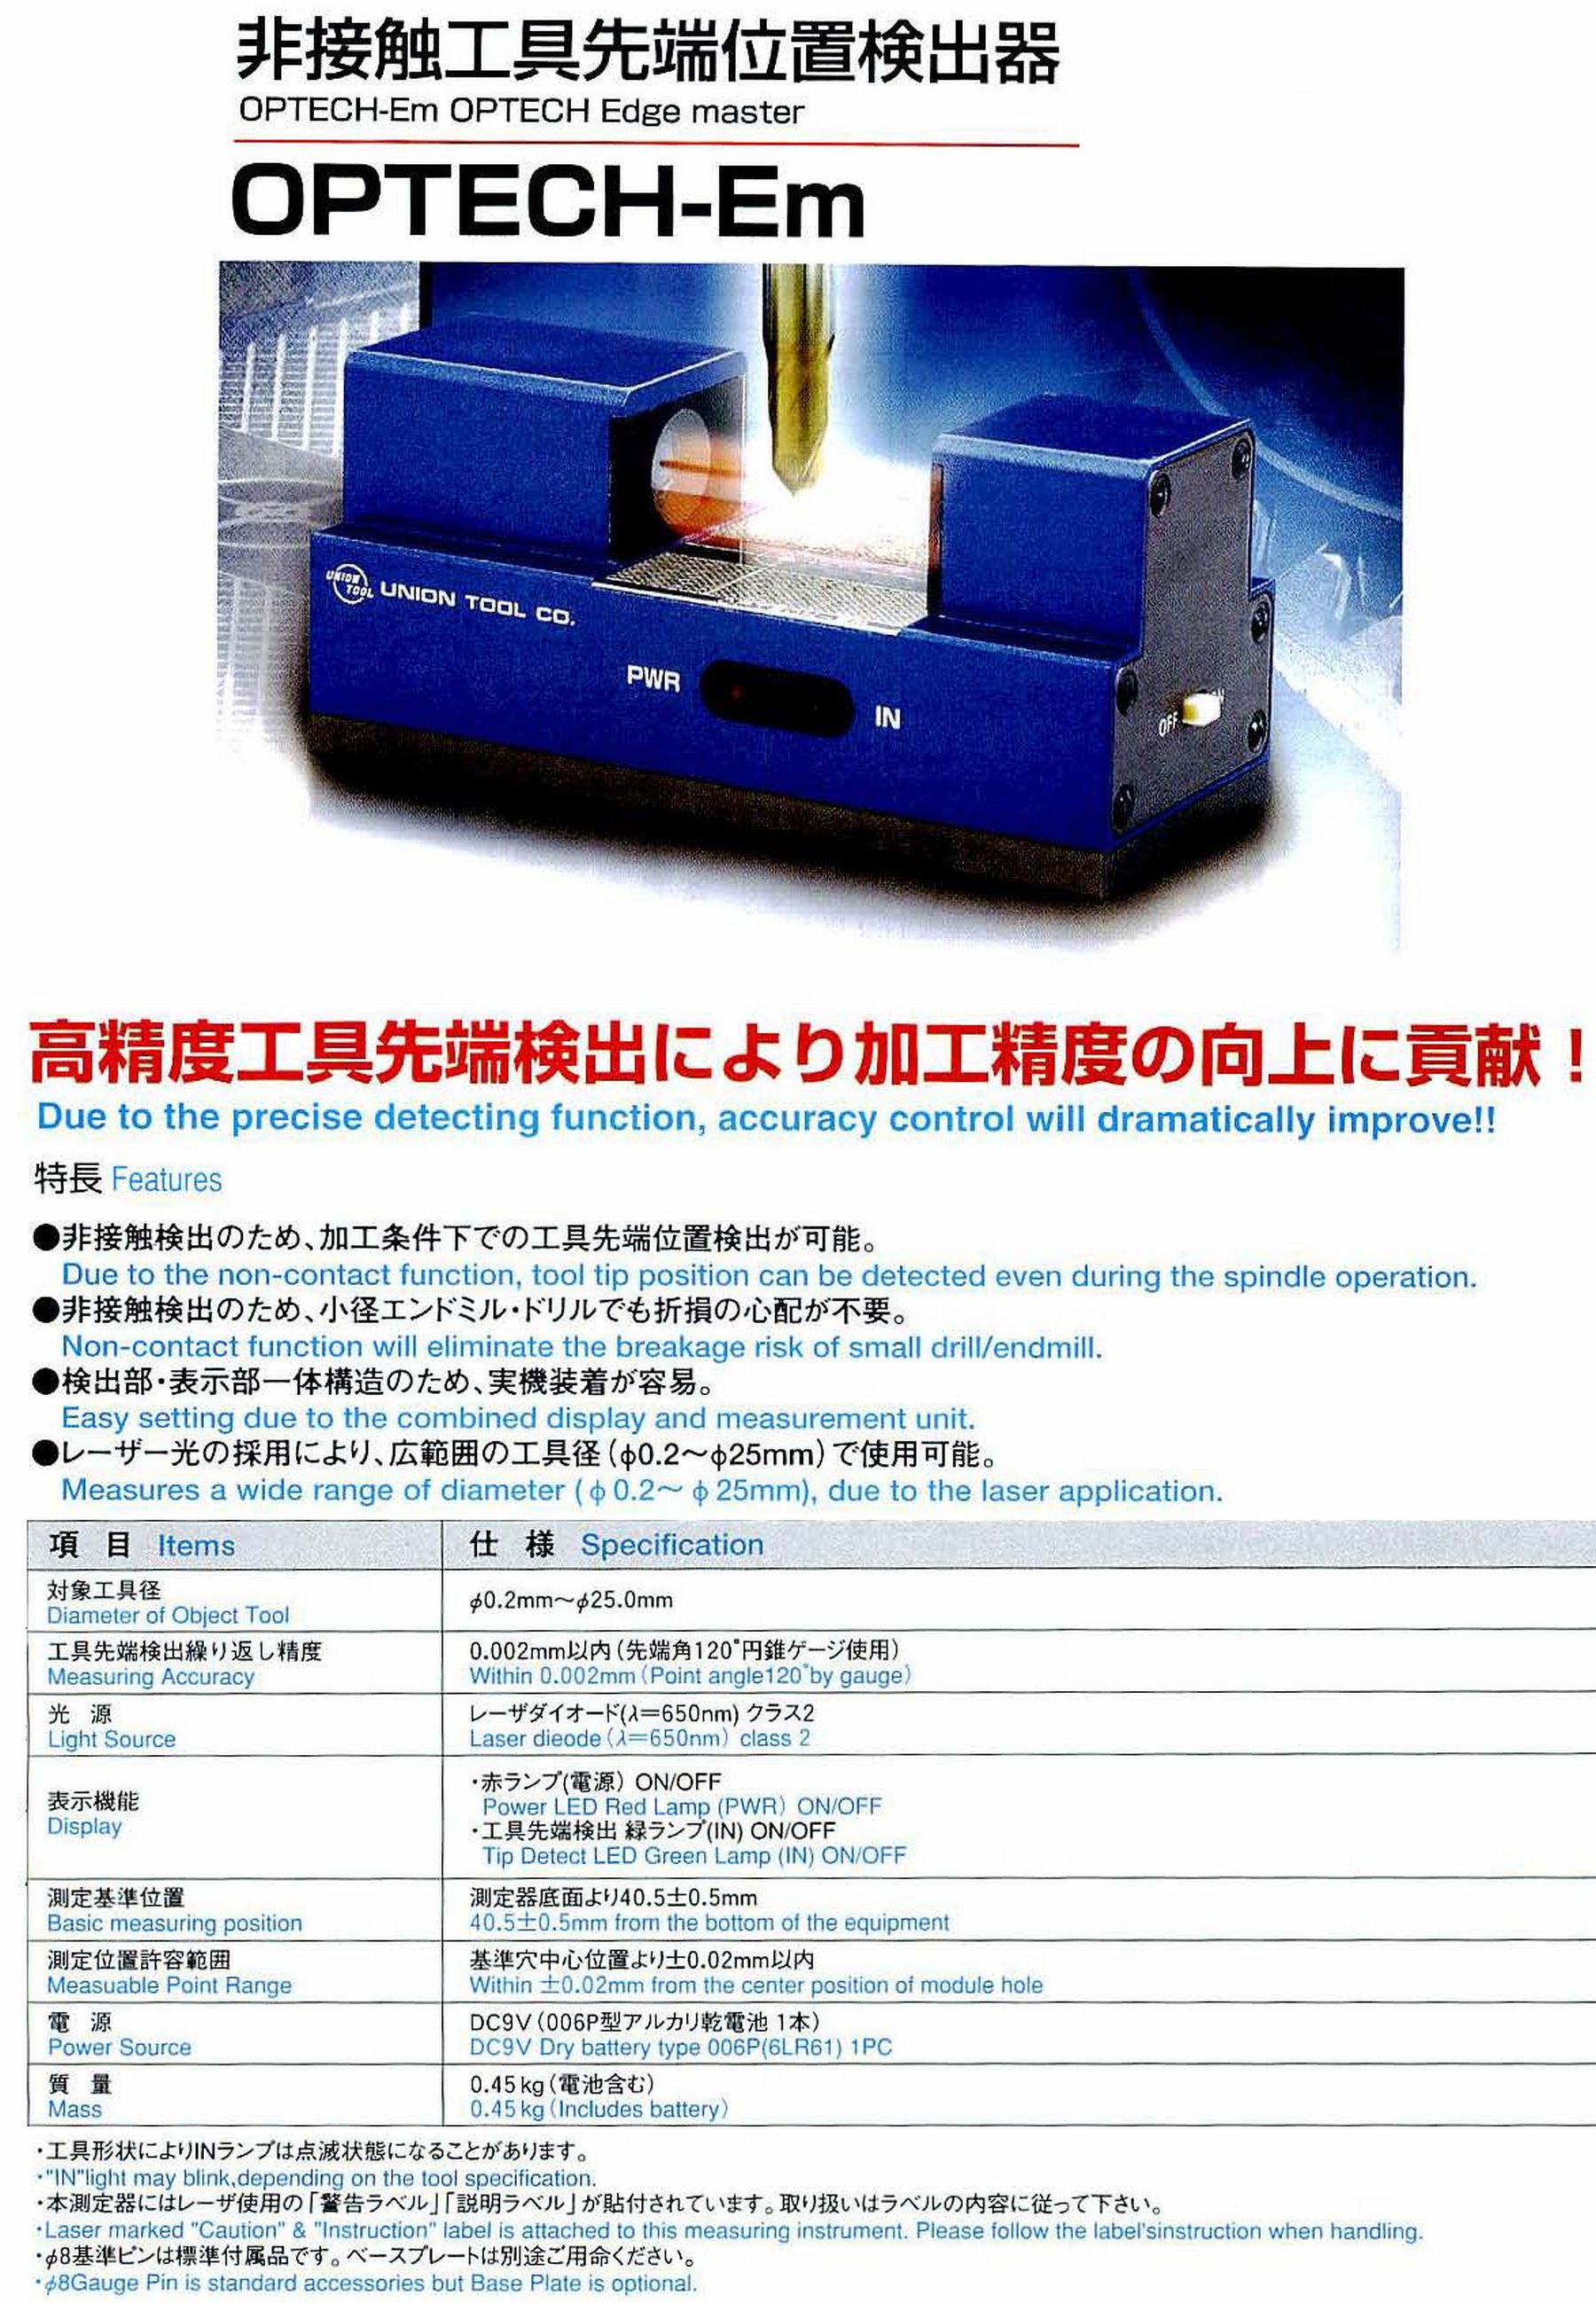 UNION TOOL/ユニオンツール 非接触工具先端位置検出器 OPTECH-Em - 91,200円 : 値打価格!, welcome to